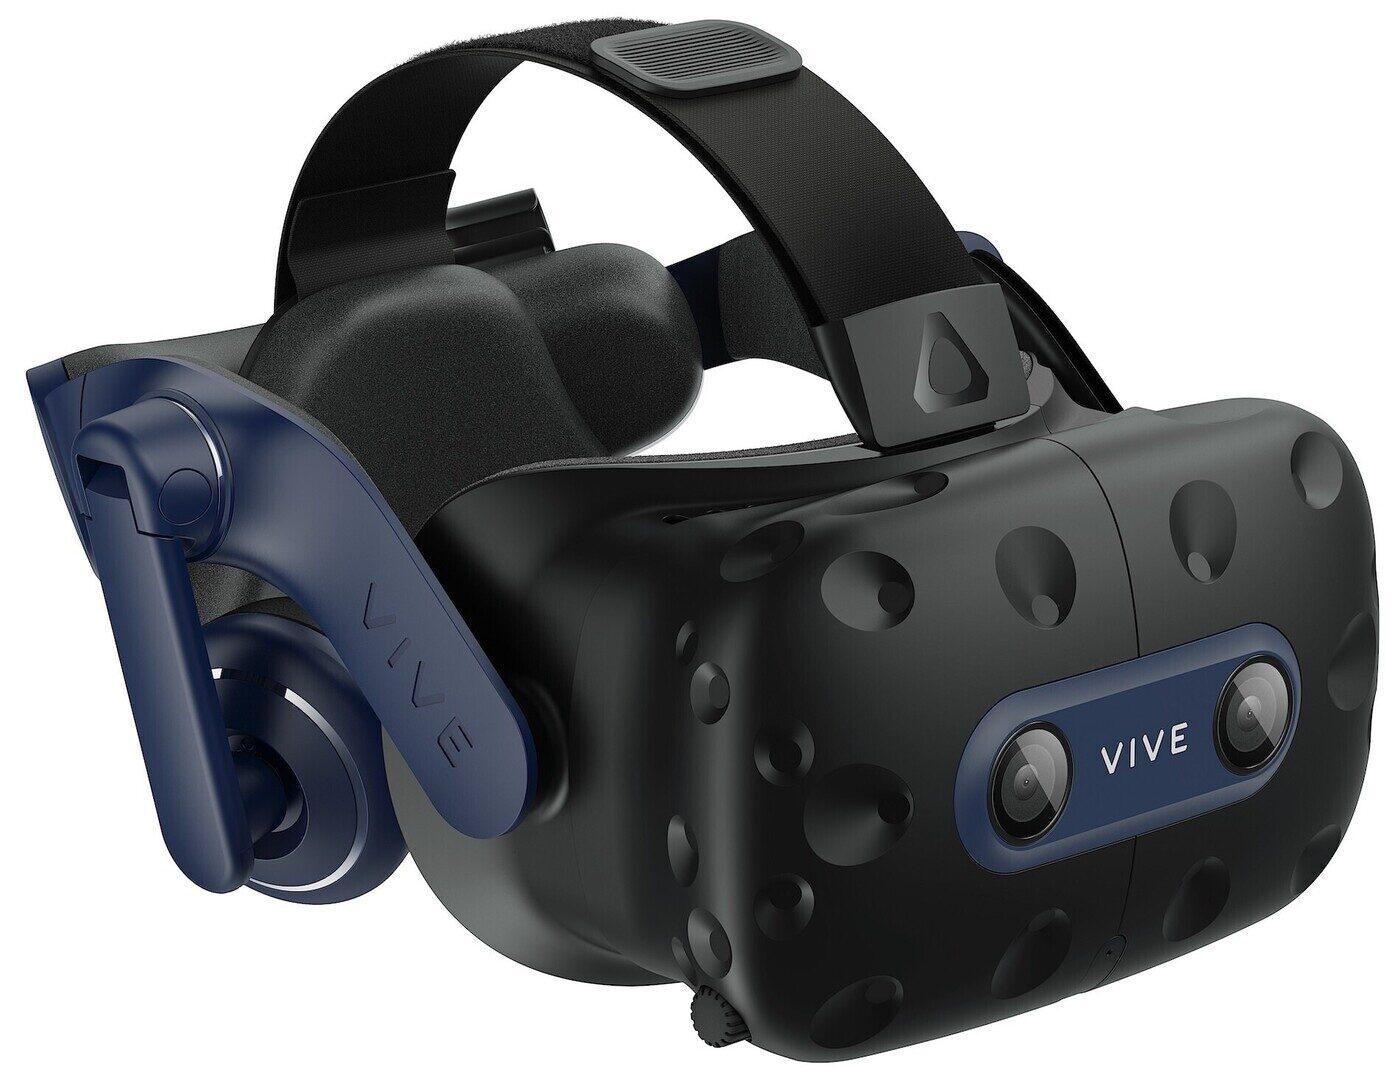 HTC Vive Focus 3 and Vive Pro 2 Headsets equipped with 5K displays